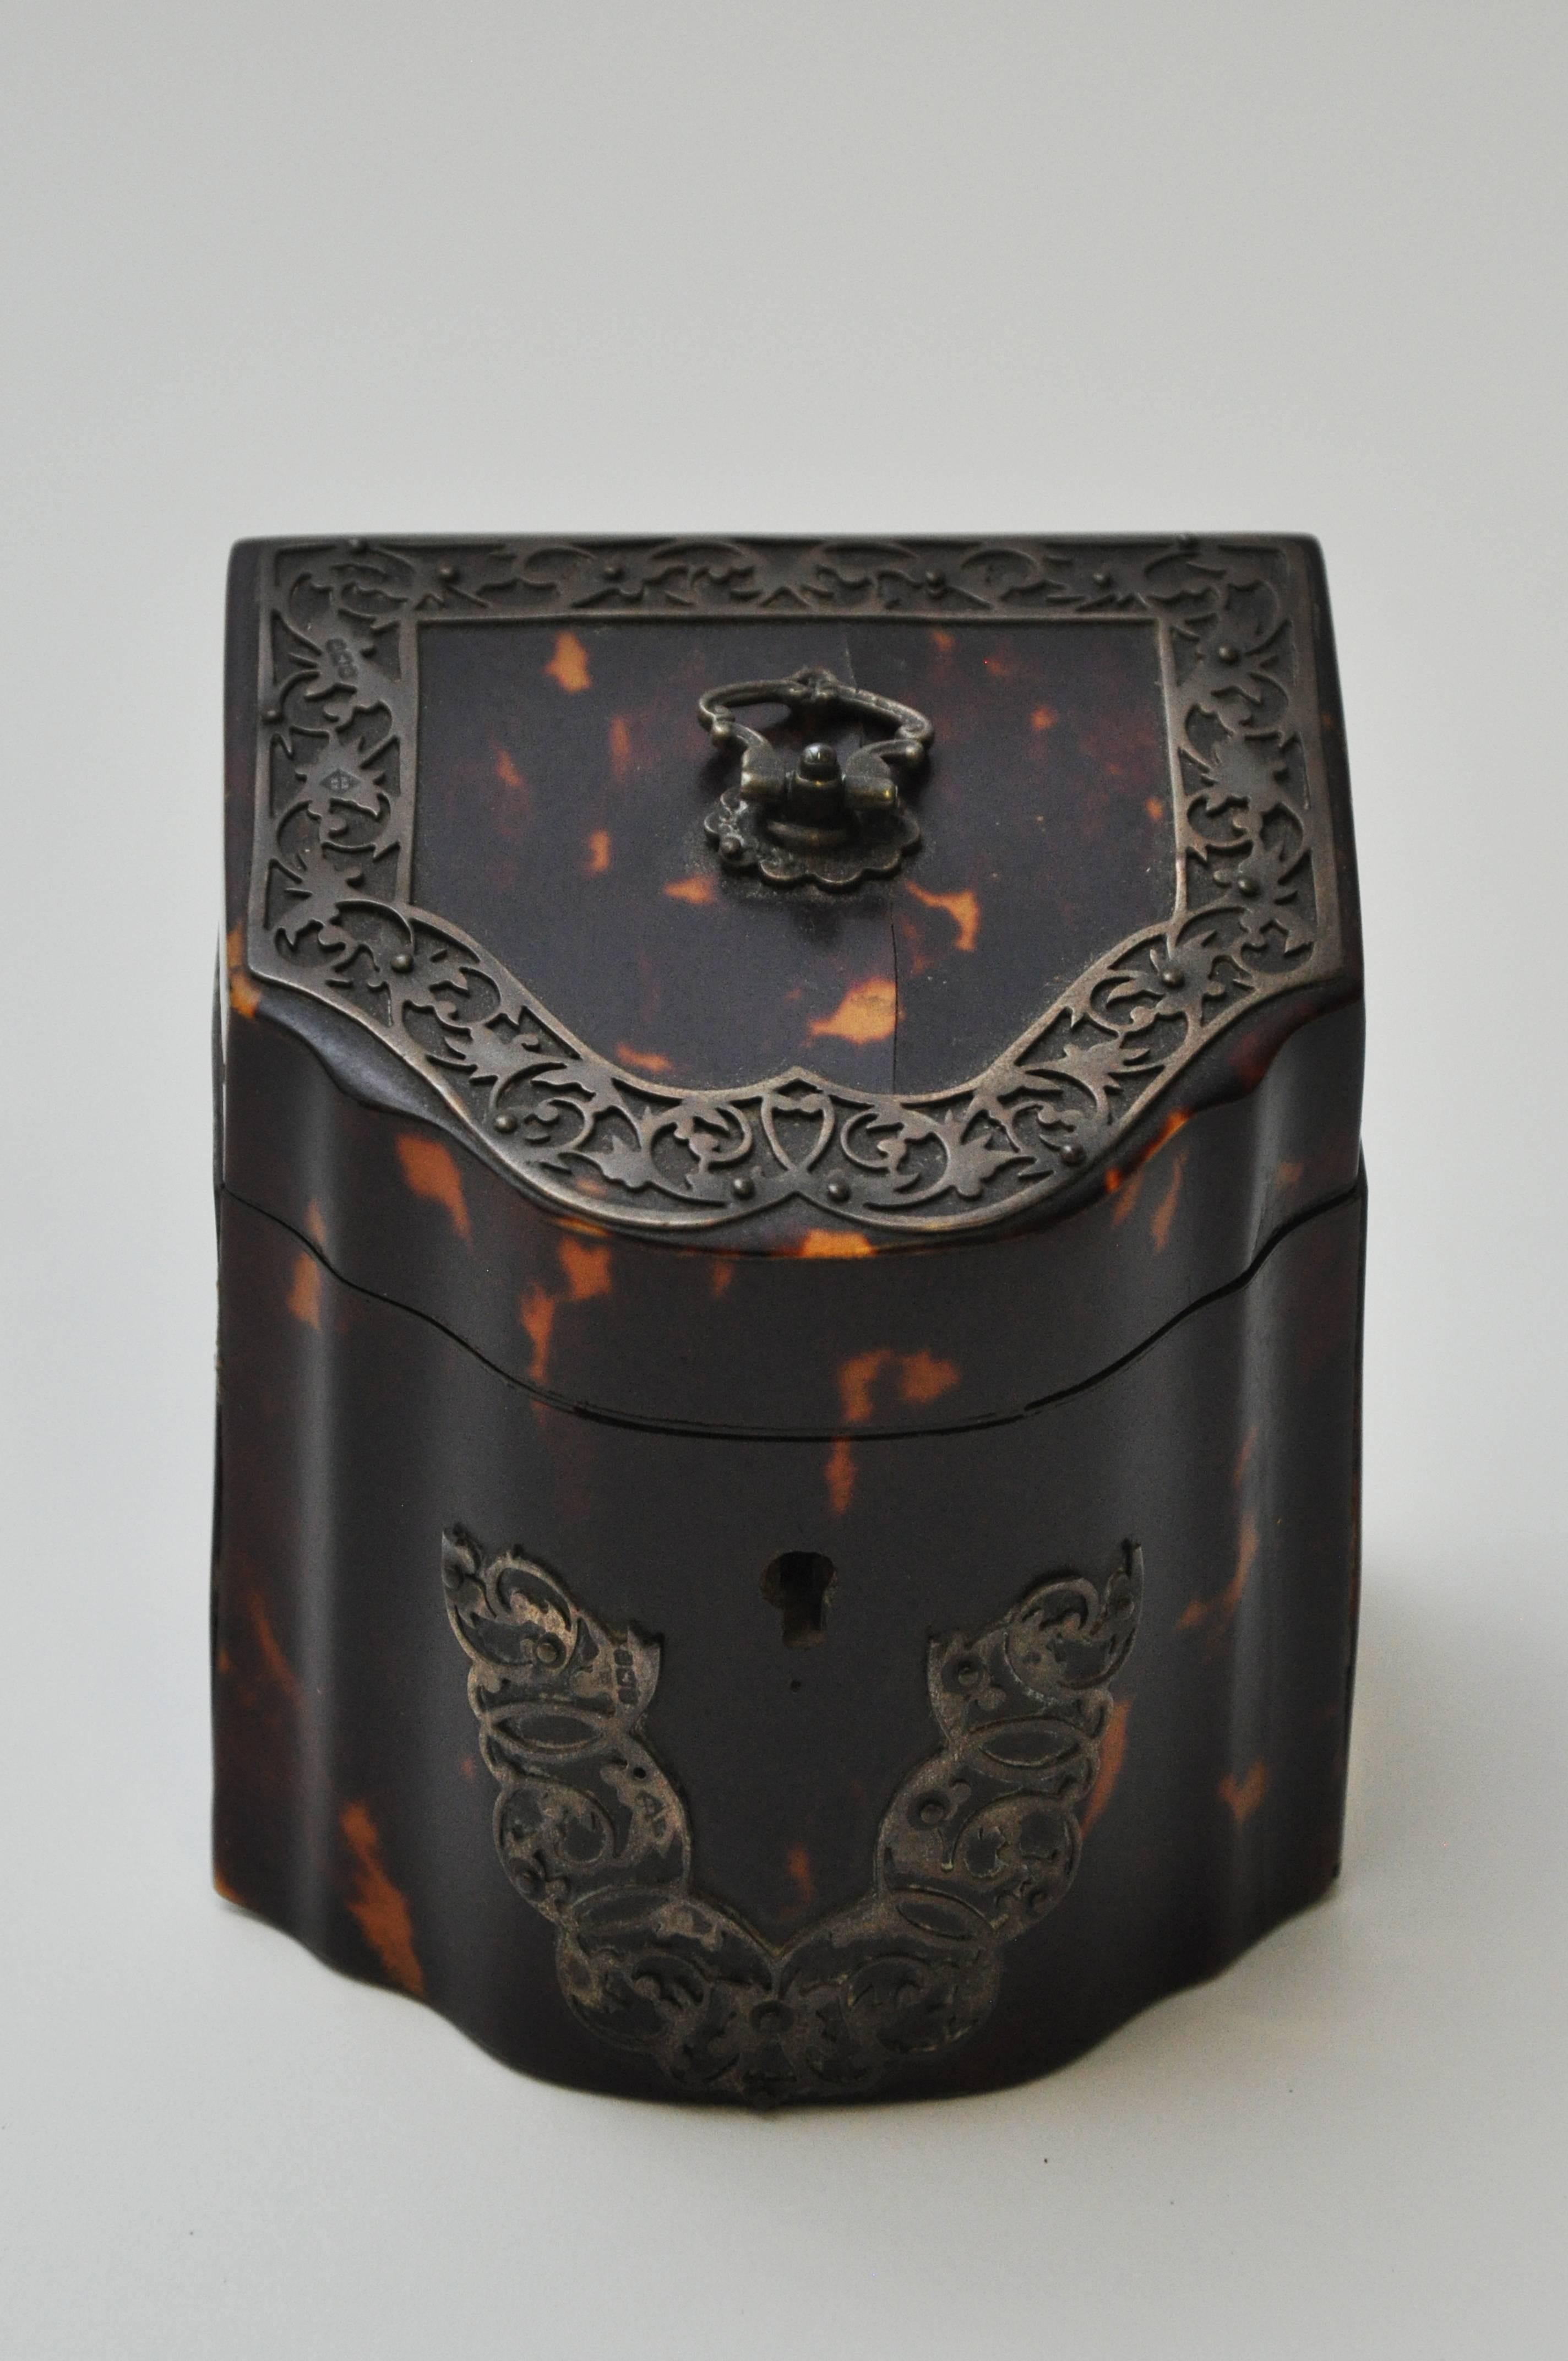 A uniquely-shaped rare 19th century tea caddy of tortoise shell with sterling silver decoration.